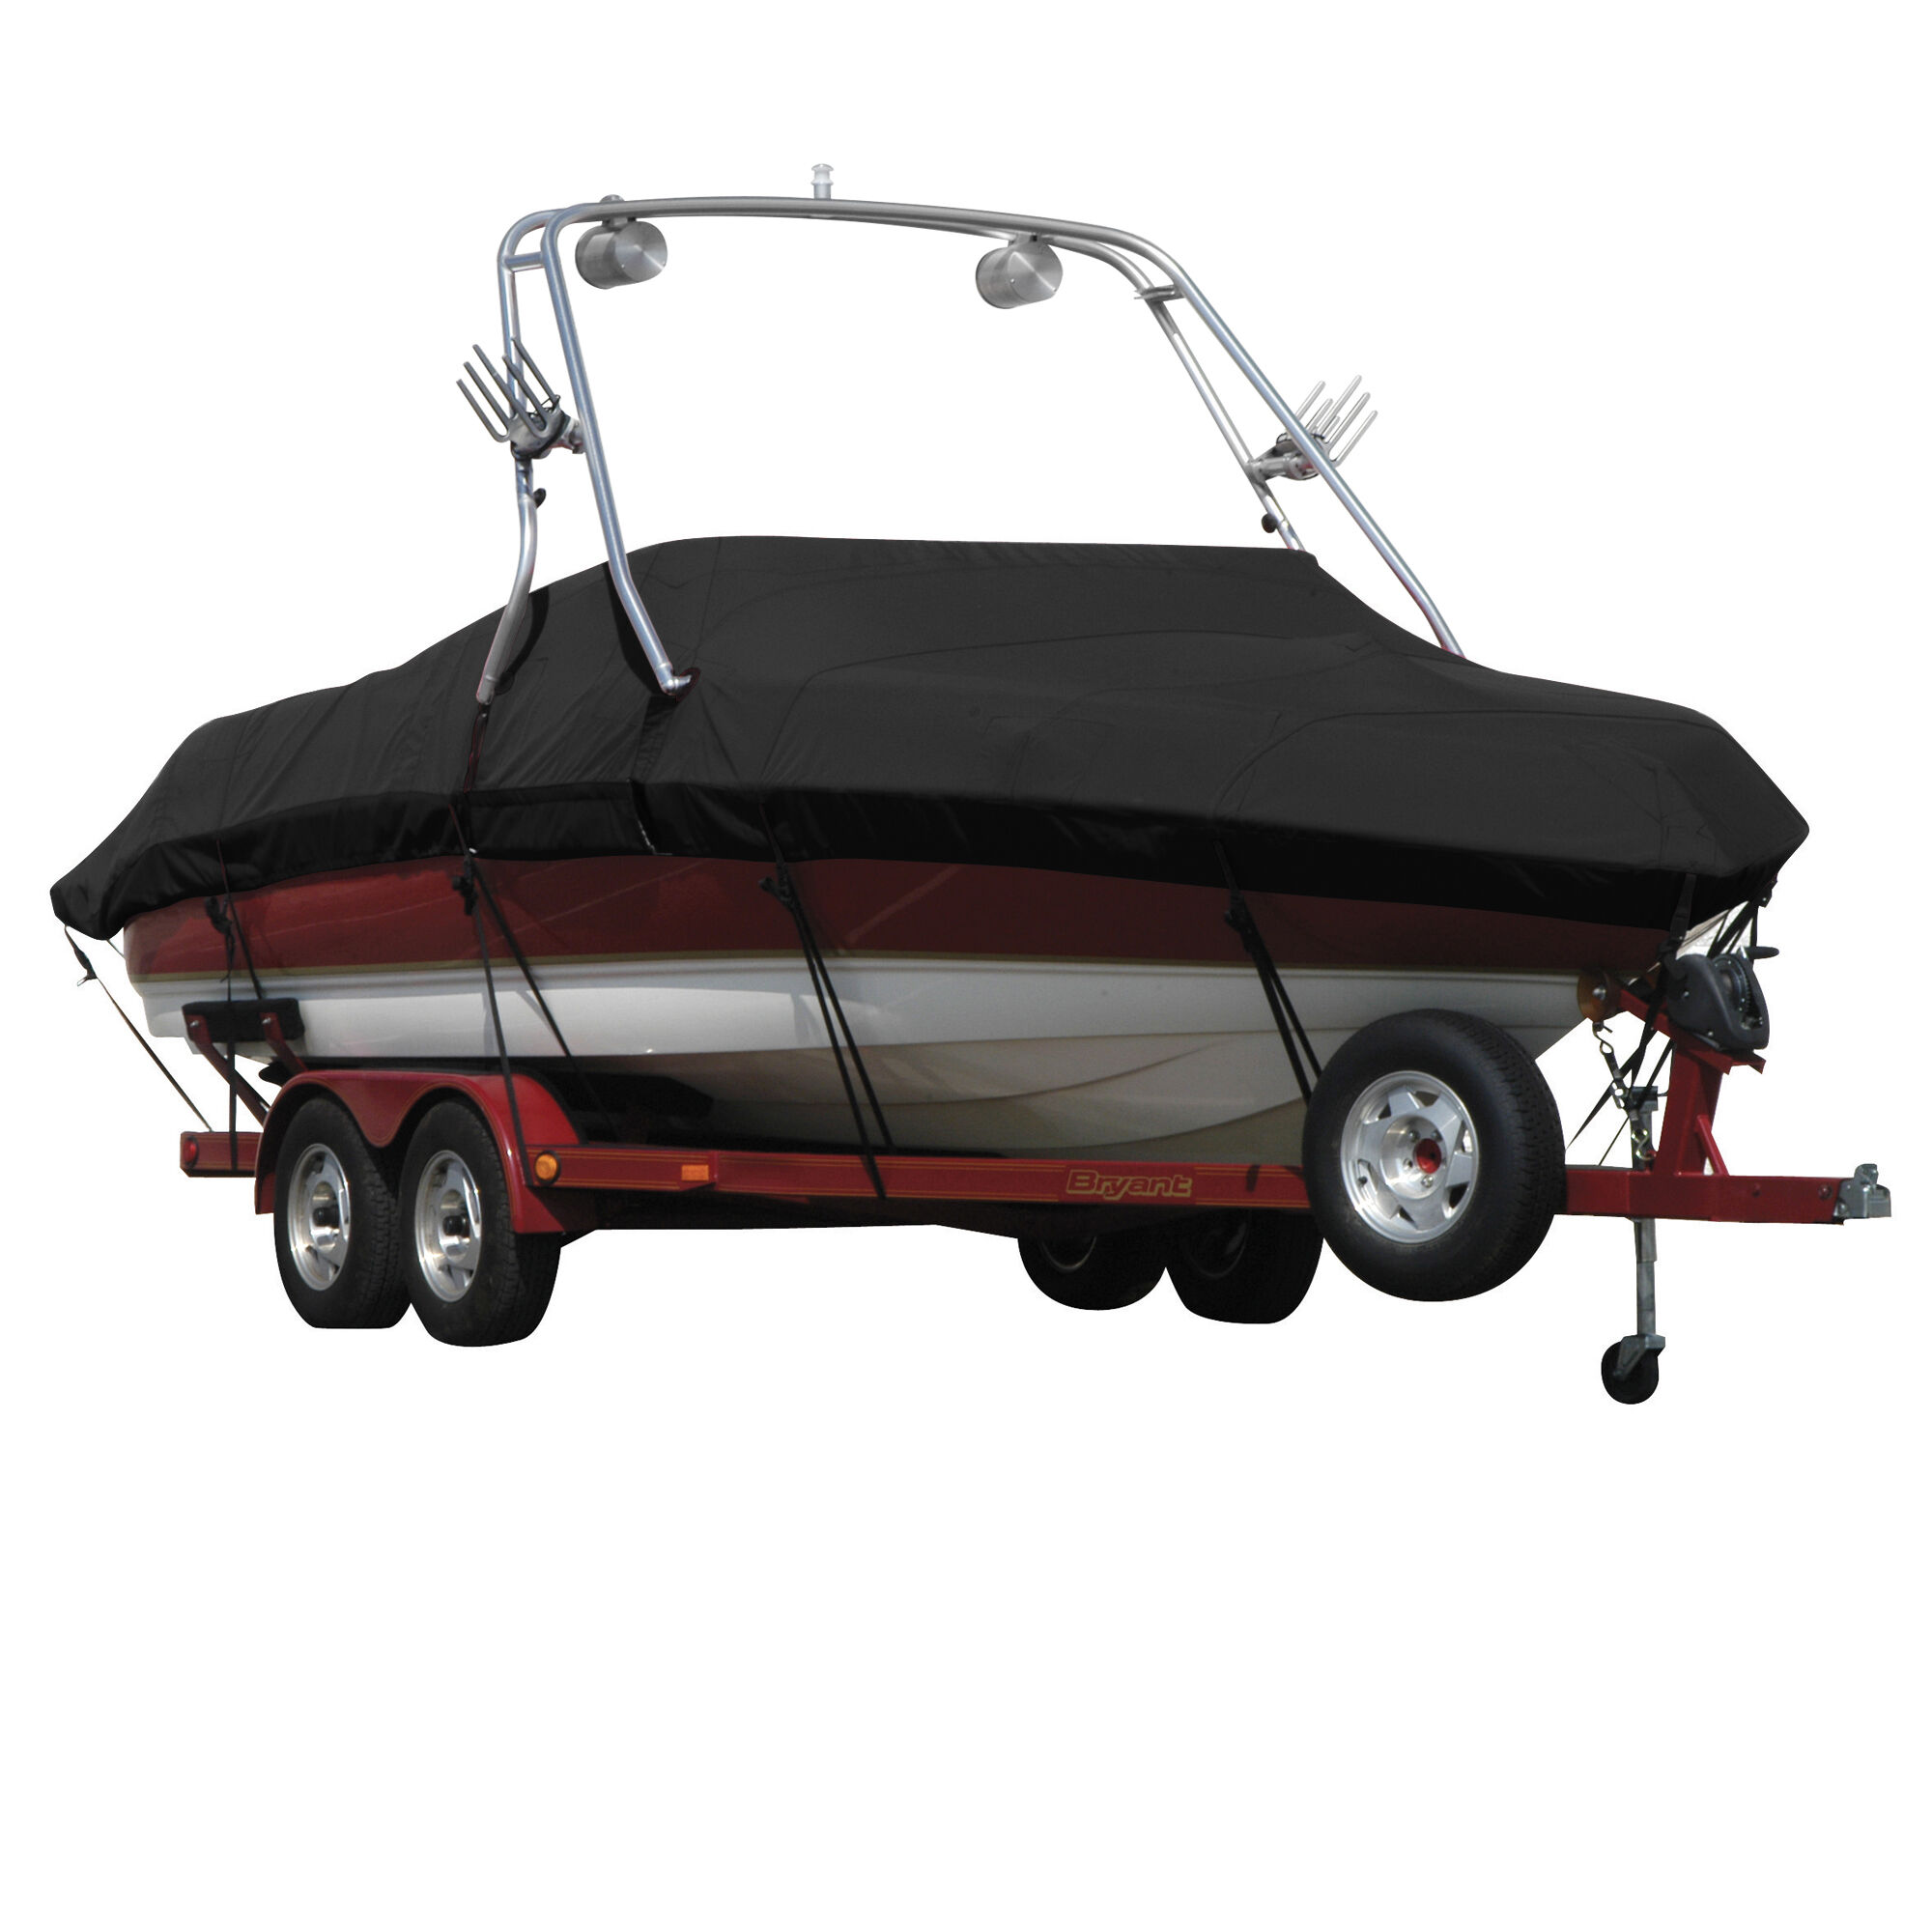 Covermate MASTERCRAFT X 45 XTREME TOWER DOES NOT Boat Cover in Black